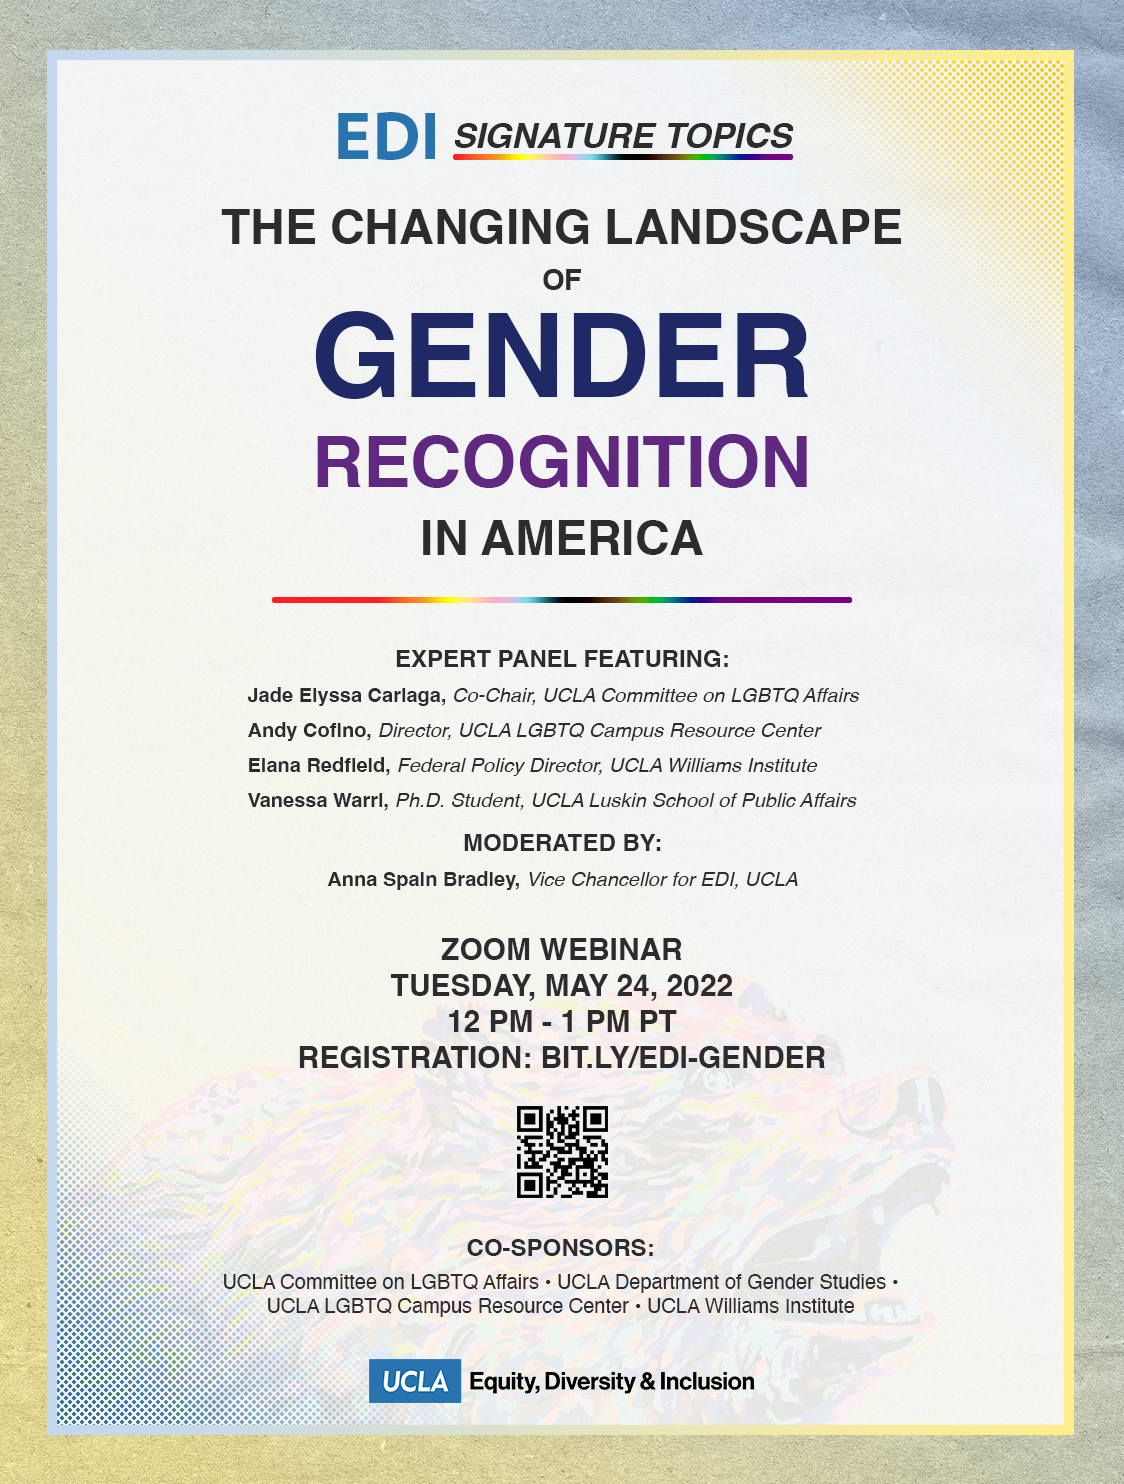 flyer for edi signature topics - the changing landscape of gender recognition in america, taking place on tuesday, may 24, 2022 at 12 pm